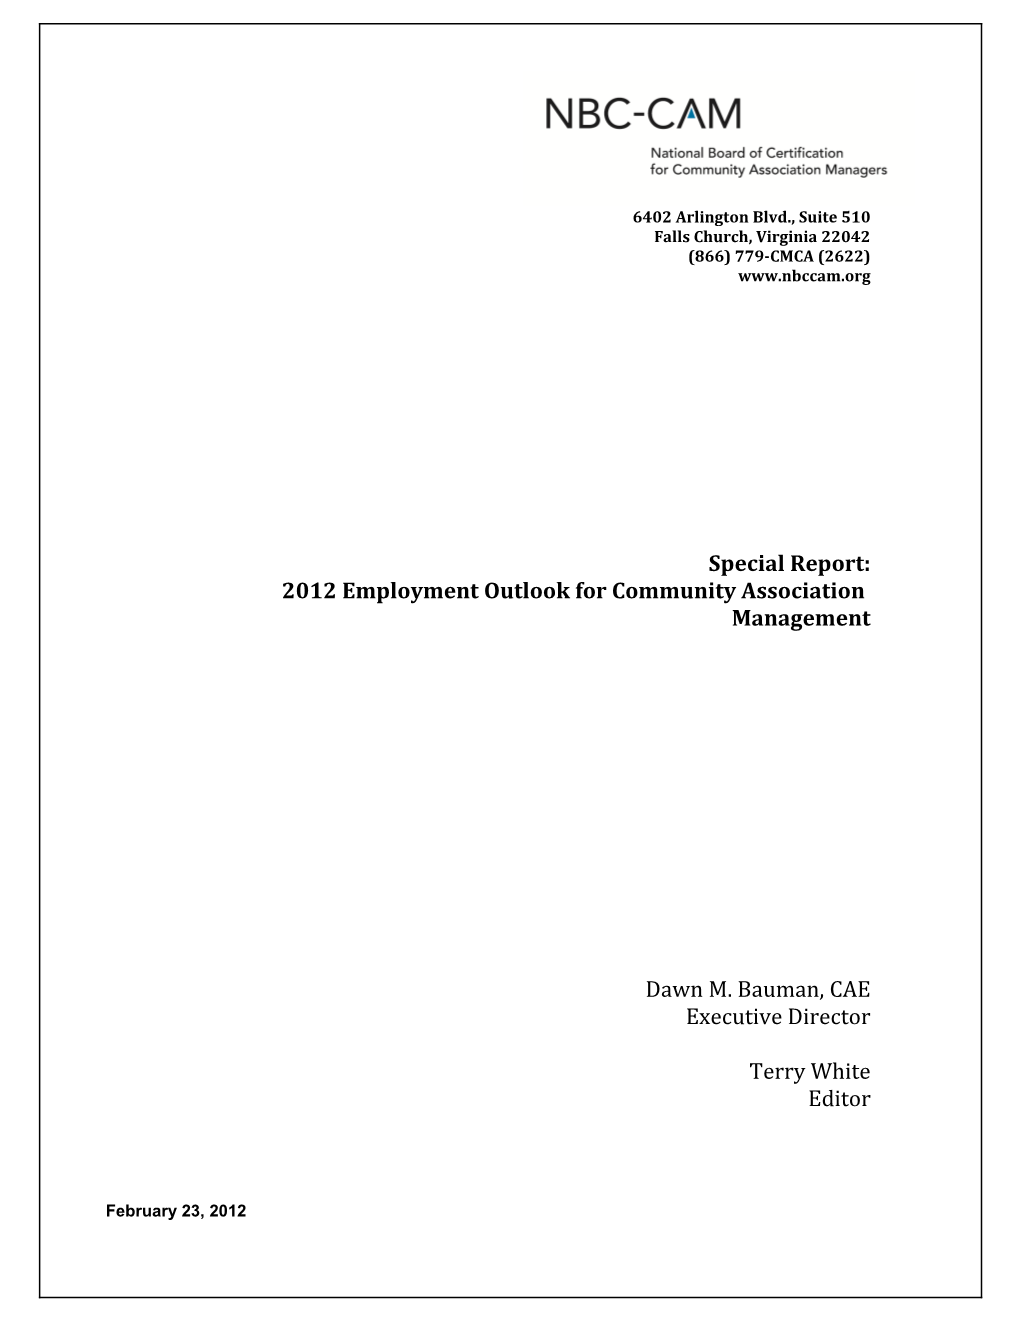 Special Report: 2012 Employment Outlook for Community Association Management